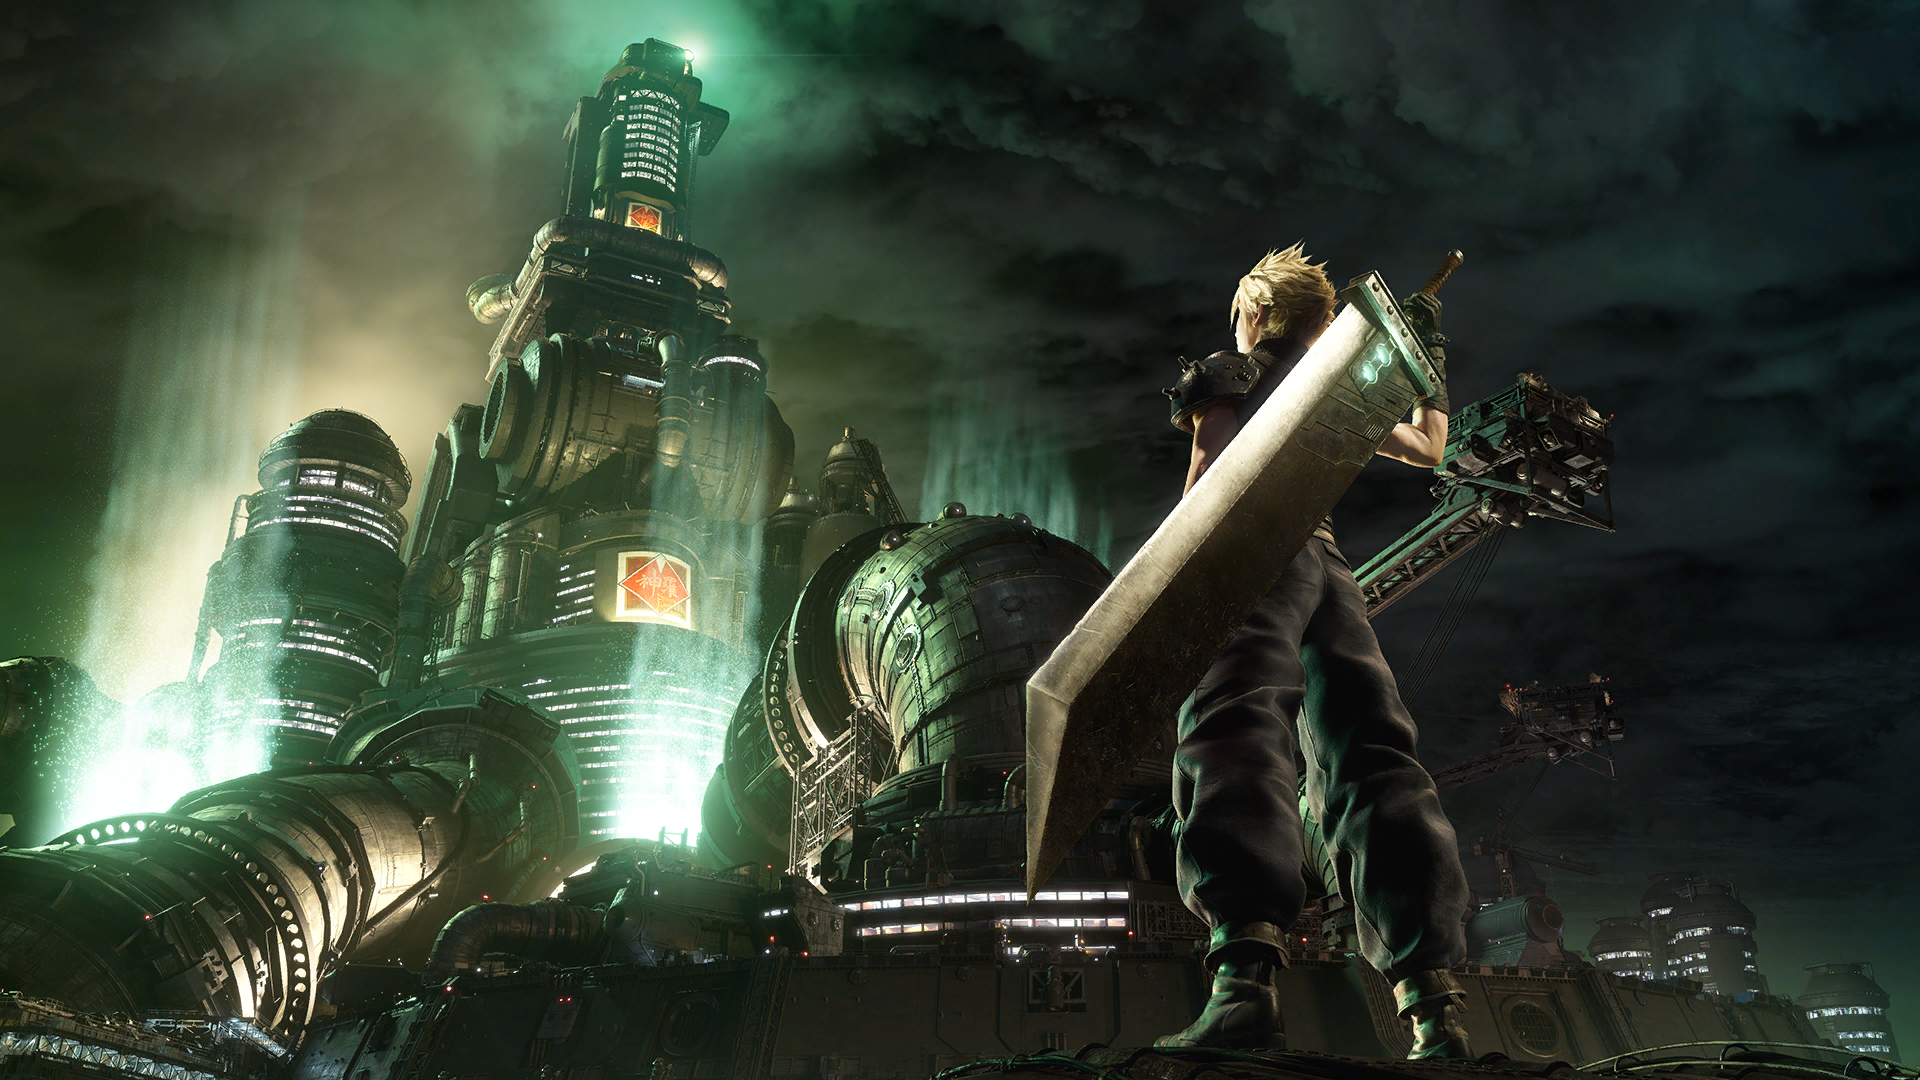 Final Fantasy Vii Remake Lore Guide Everything You Need To Know Before You Play The Mako Reactor